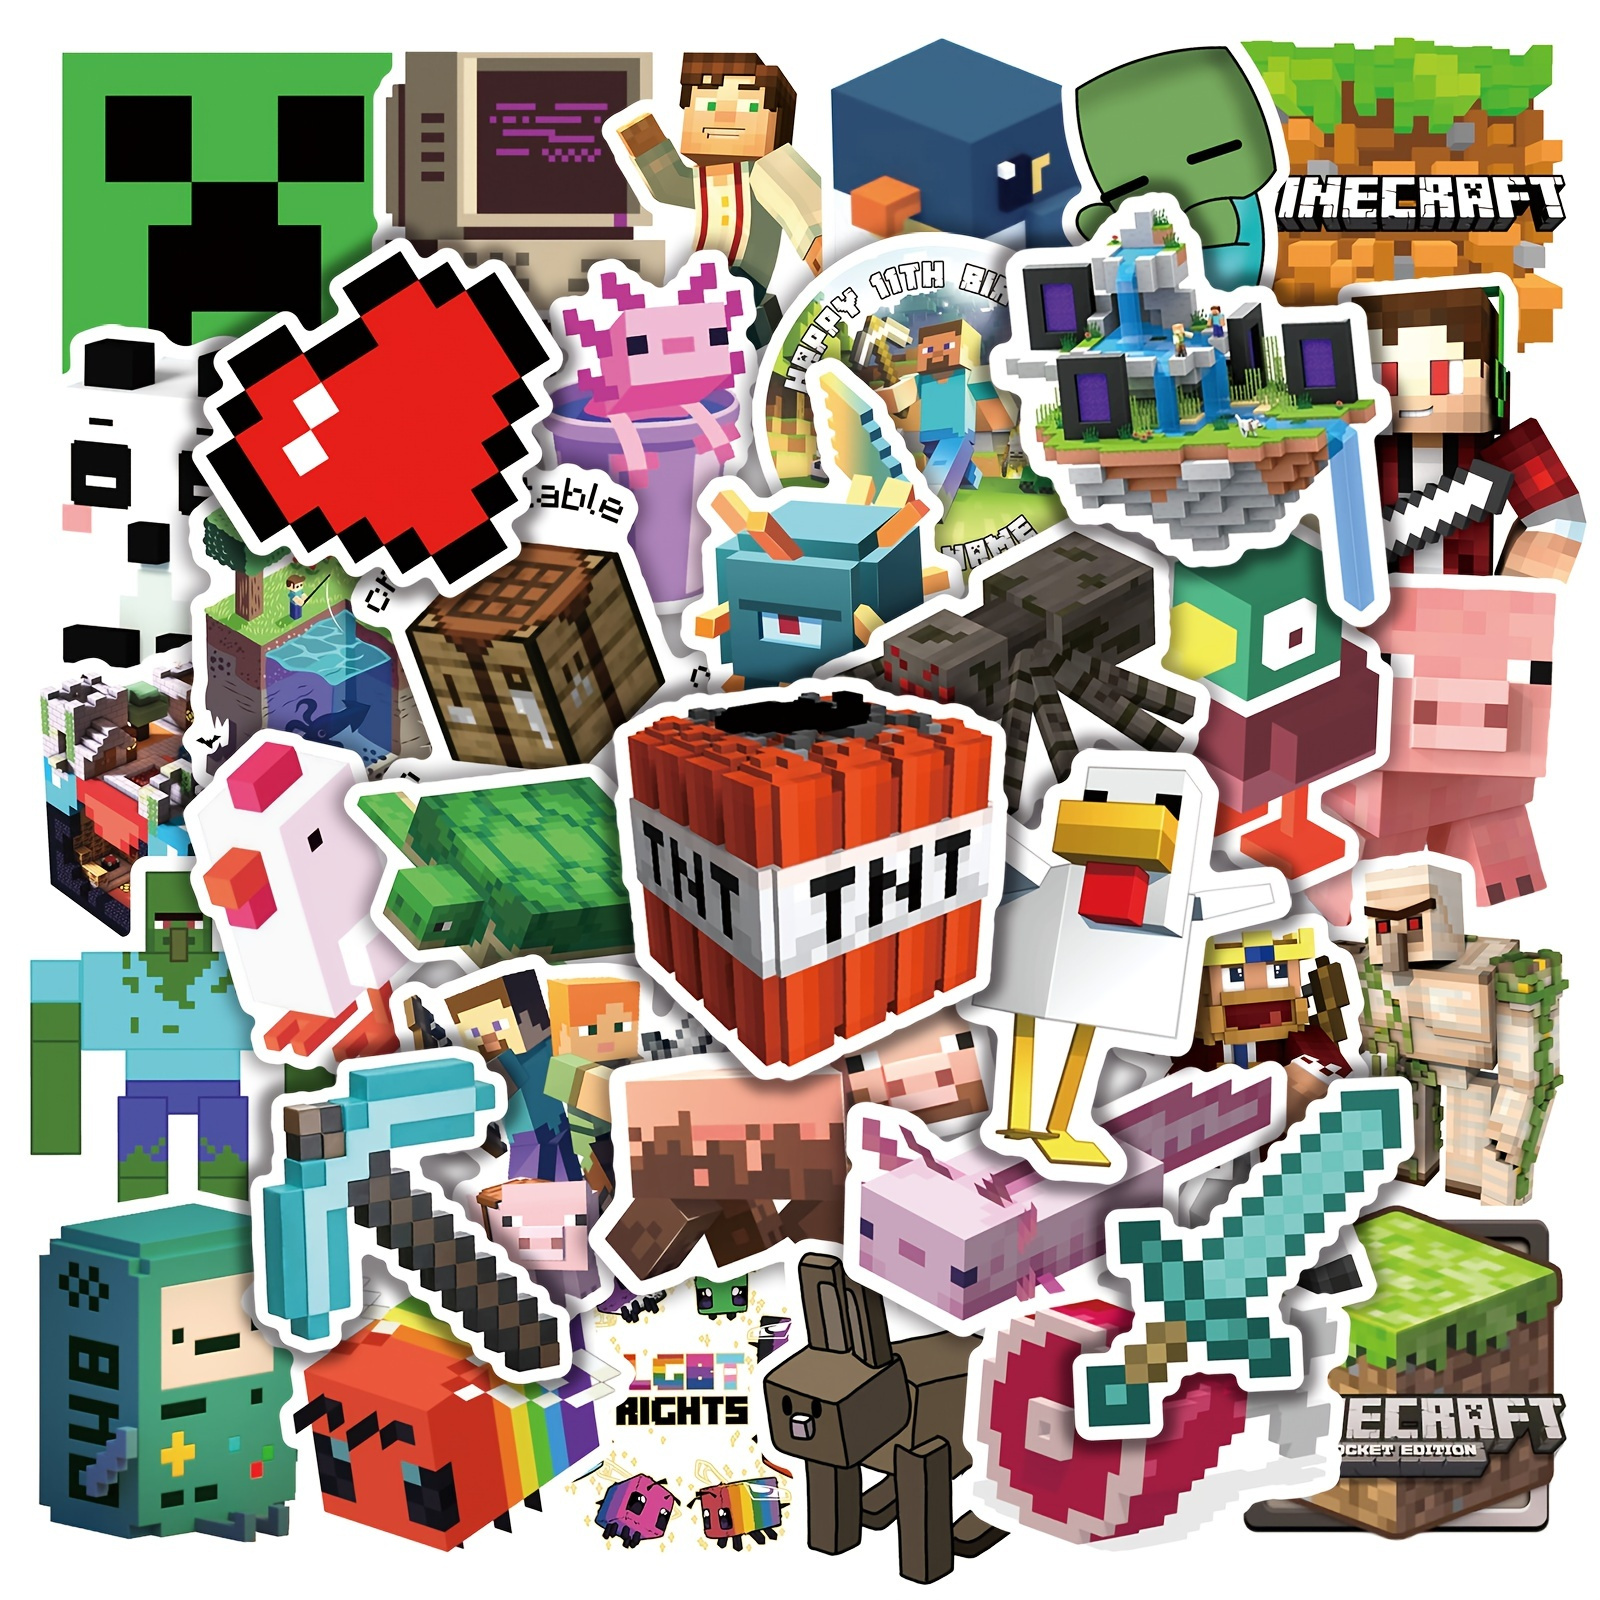 

50pcs Pixel Square Series Stickers - Add Fun & Style To Your Suitcase, Notebook, Water Cup & More!